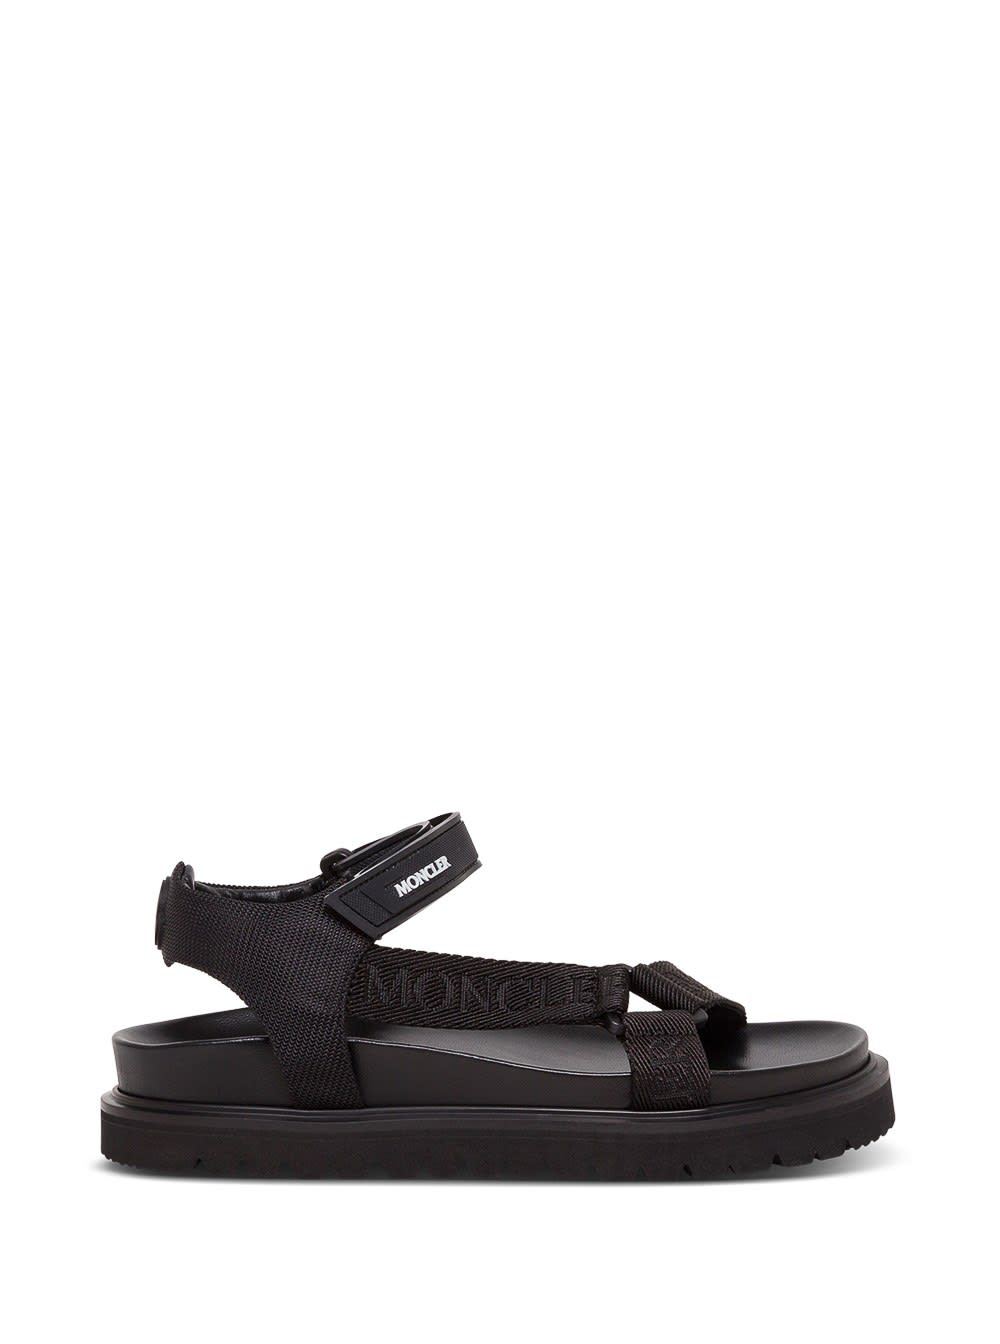 Buy Moncler Flavia Black Sandals With Logo online, shop Moncler shoes with free shipping